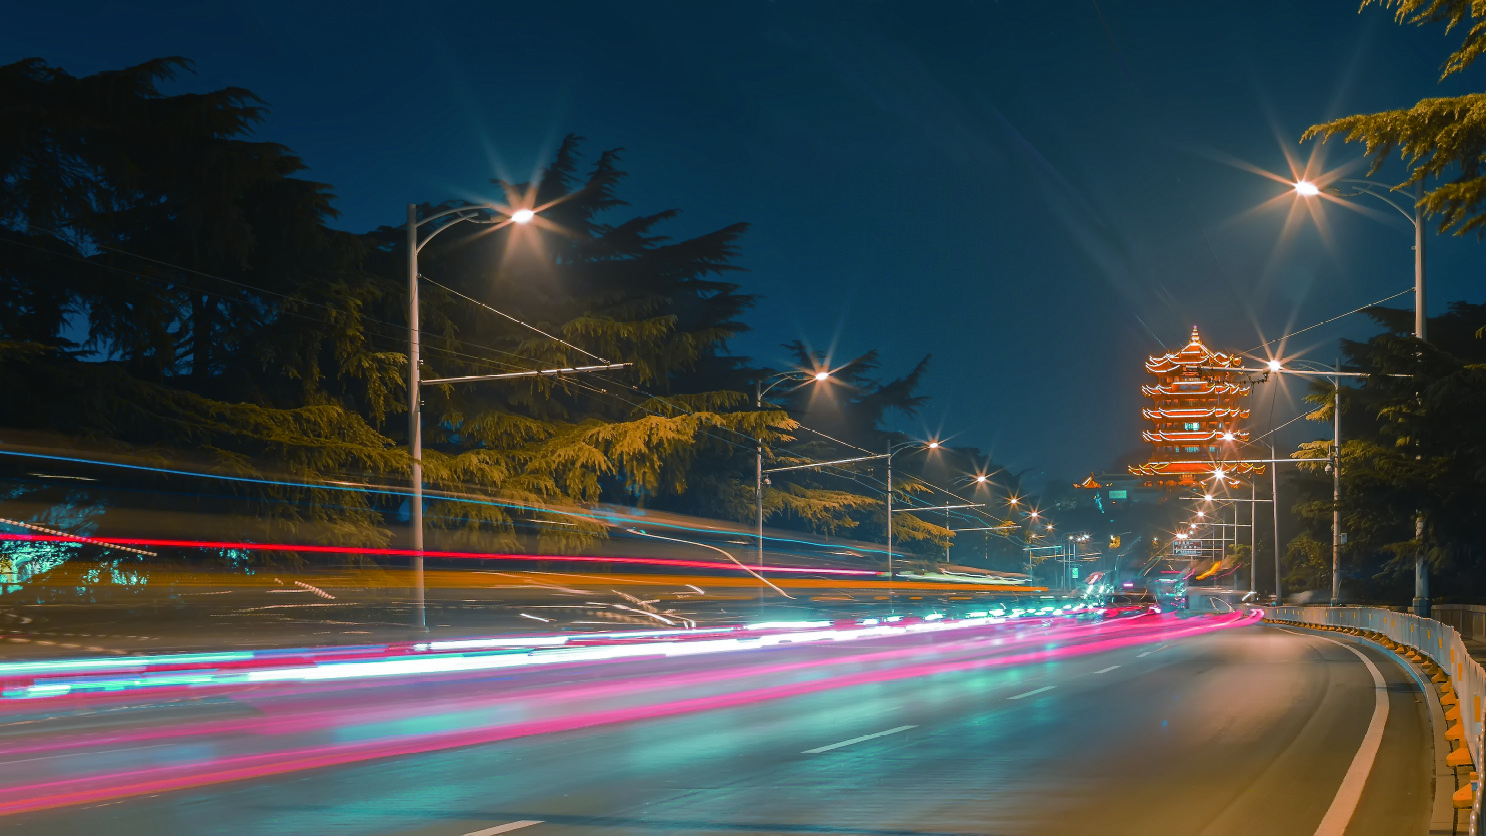 What is the most efficient light for the streets?